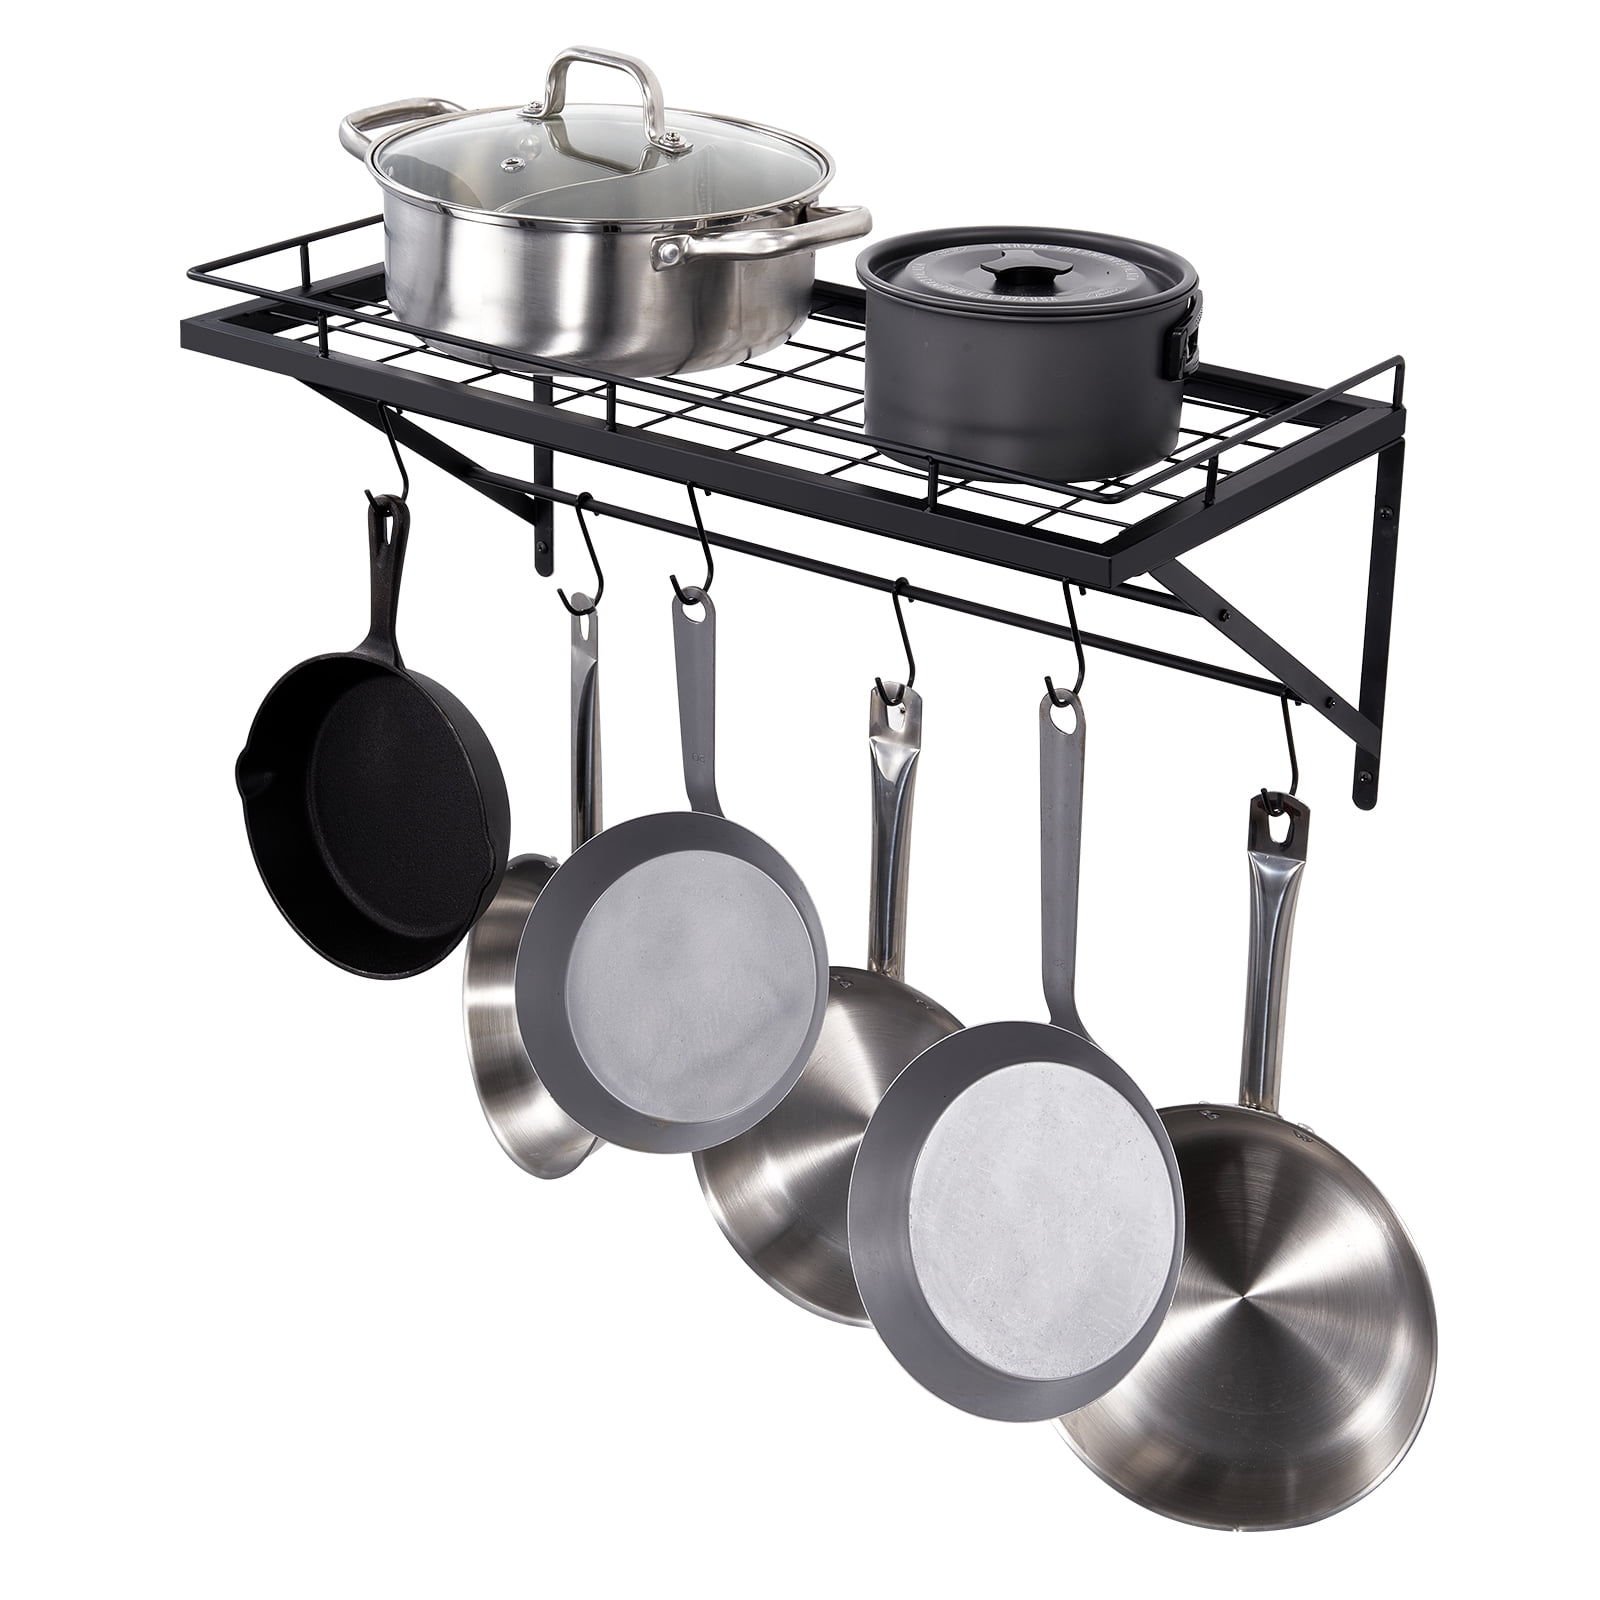 Wall Mounted Kitchen Utensil Rack, Multifunction Kitchen Rail, Clip-on  Carbon Steel Pots Pans Hanger with 8 Hooks, for Cooking Utensils Bathroom